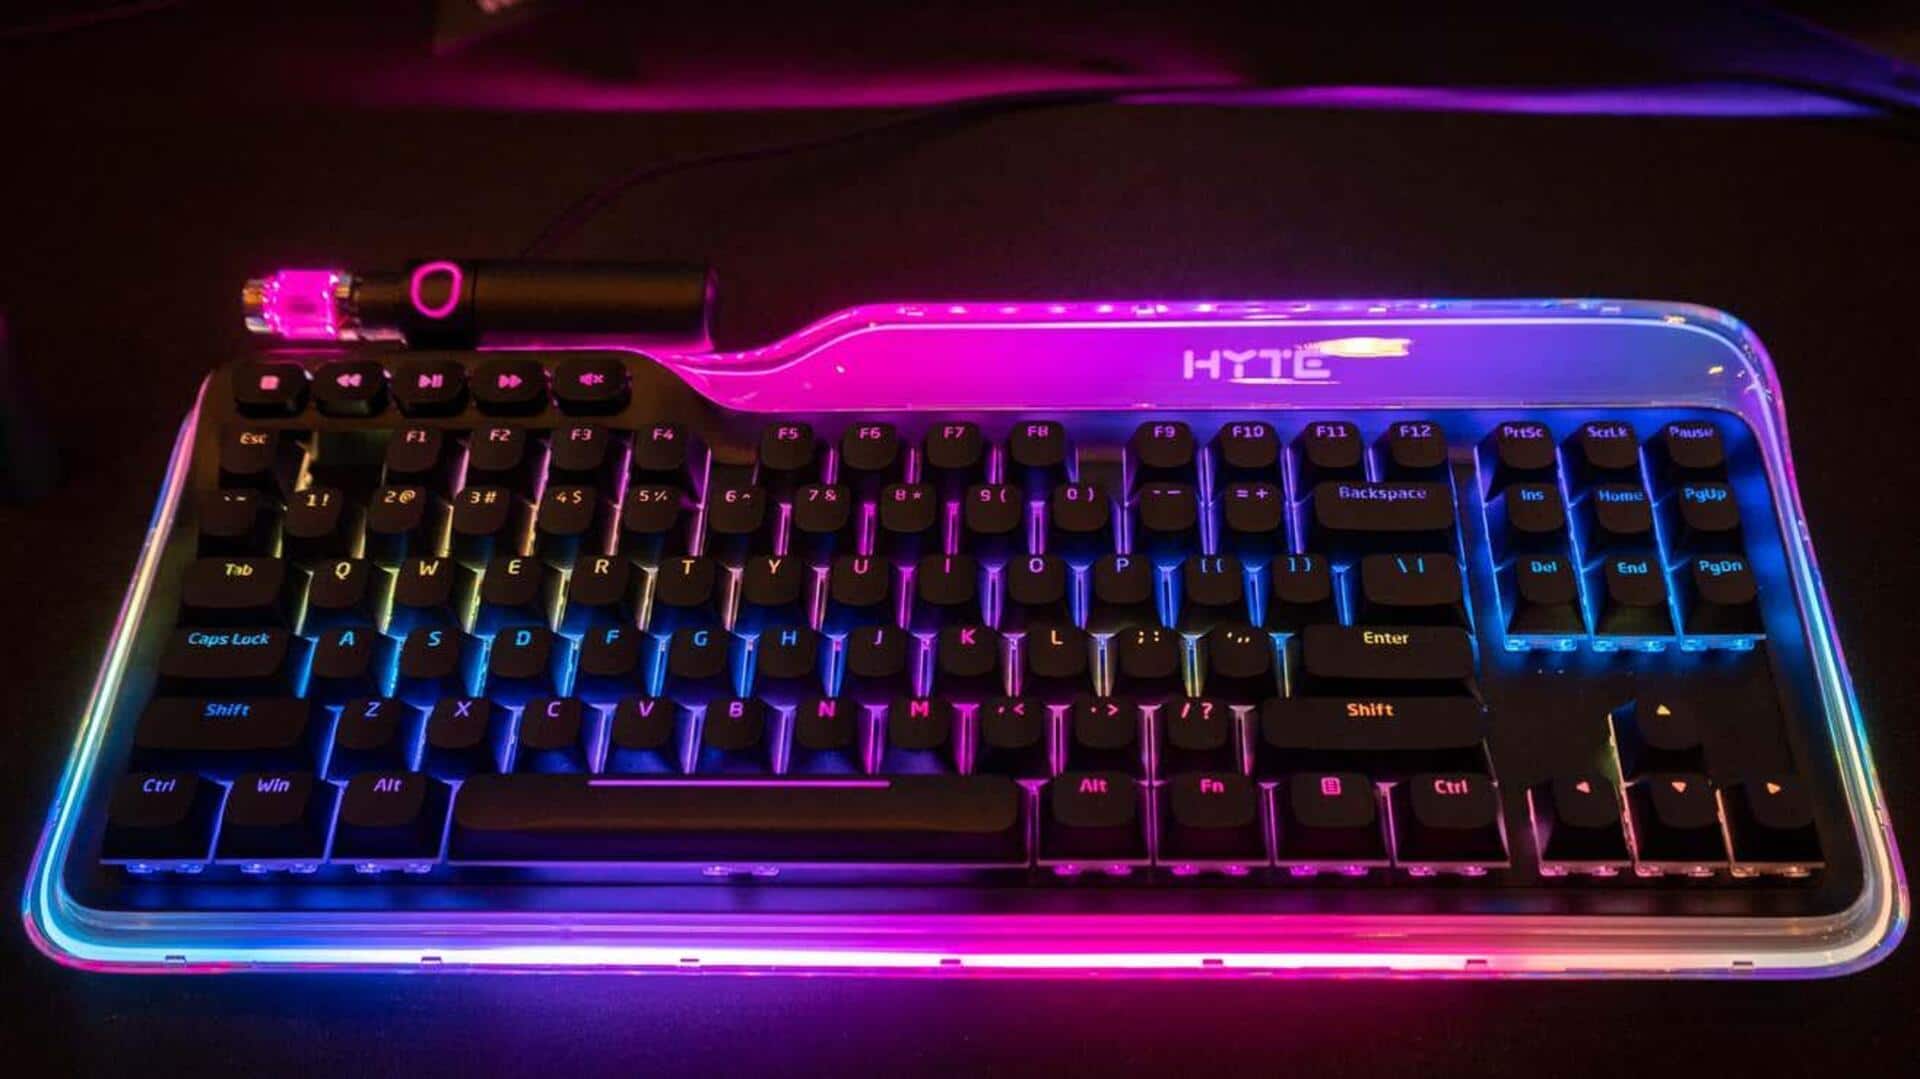 Love customizing your keyboard? Here's a new toy around